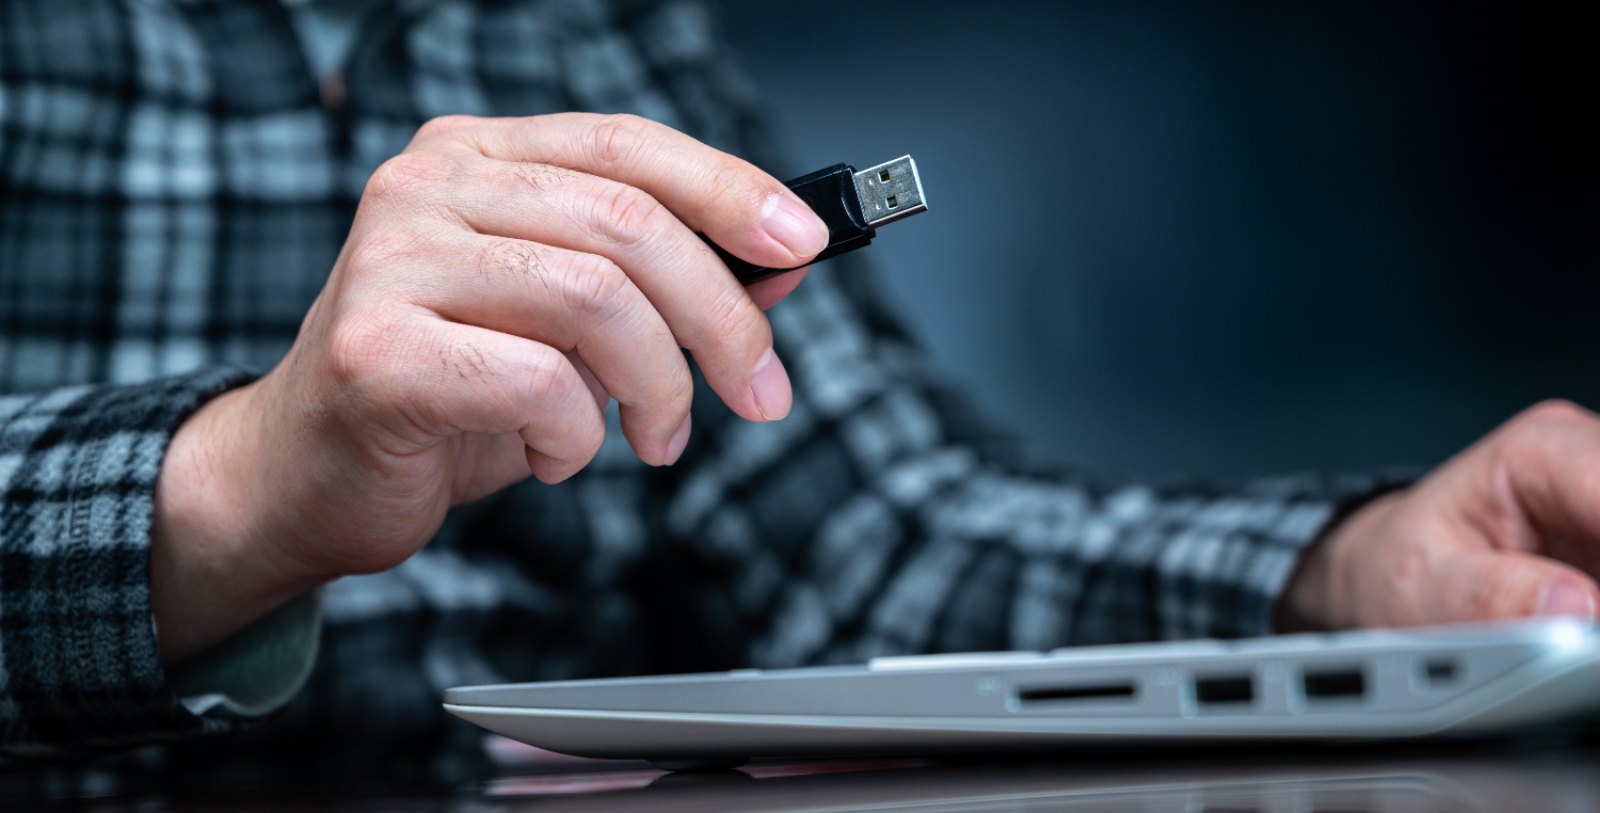 how to recover files from a dead USB flash drive